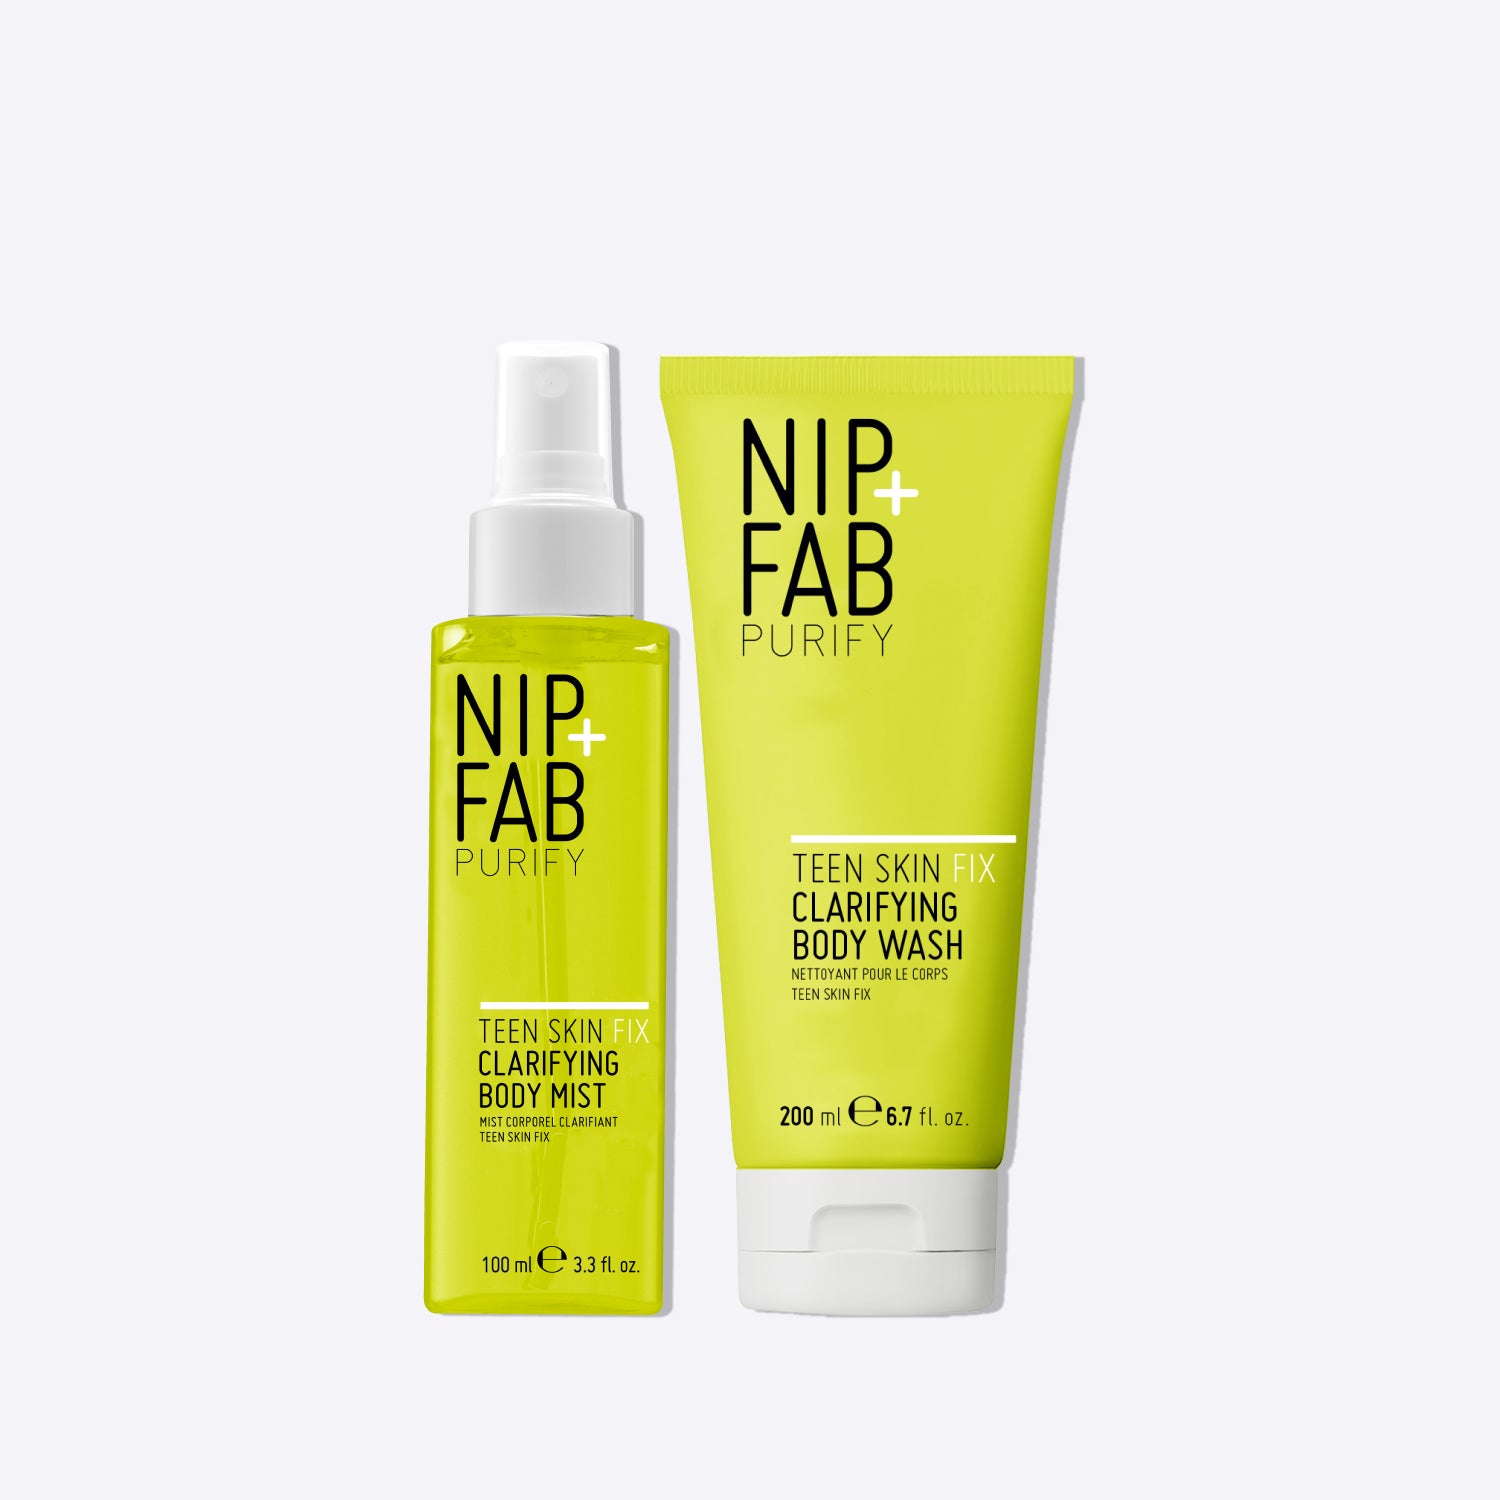 The Body Clear Teen Duo